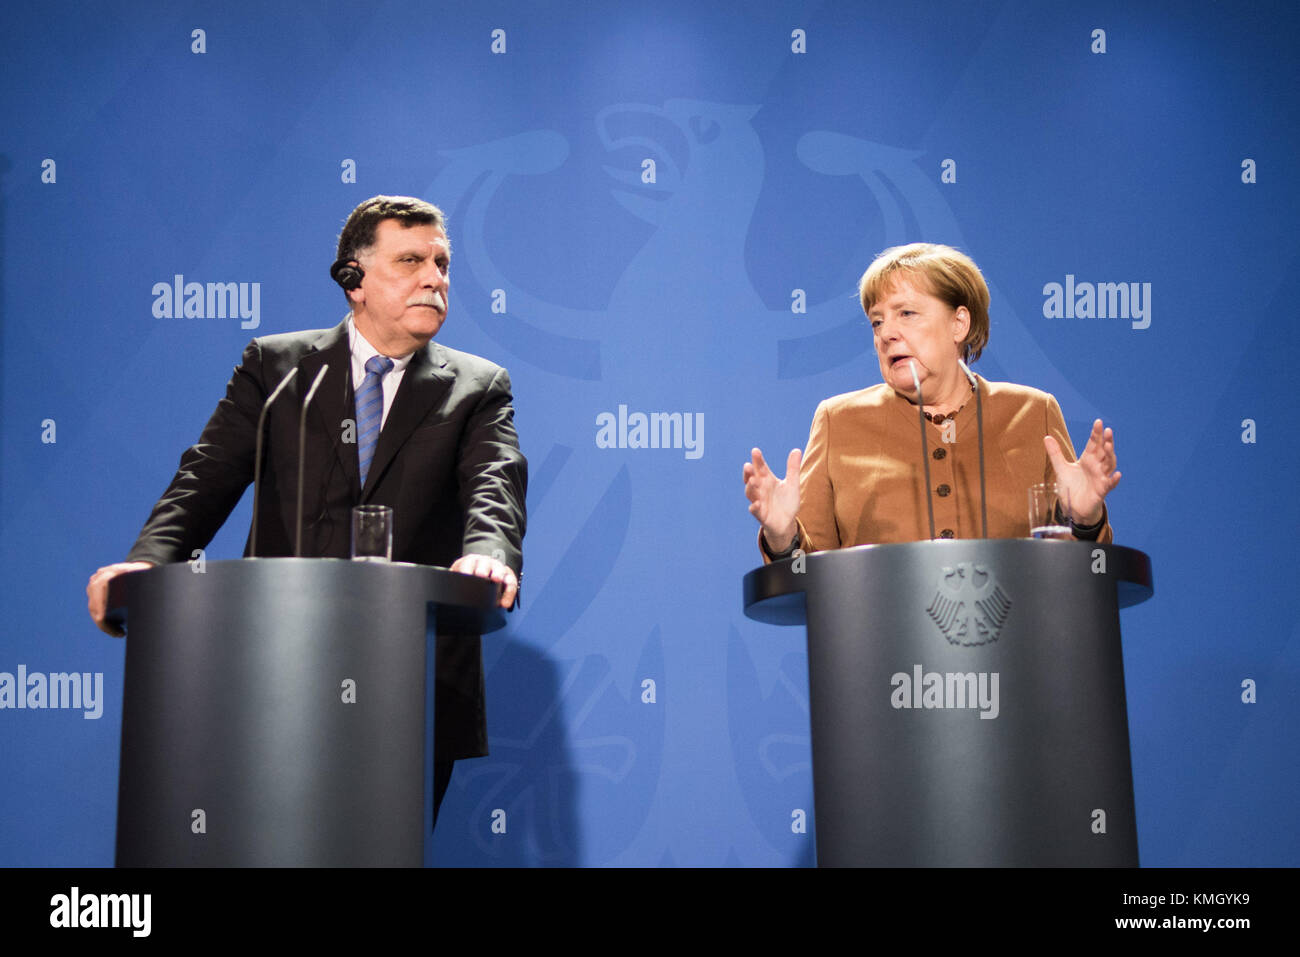 Berlin, Germany. 7th Dec, 2017. German Chancellor Angela Merkel (R) addresses a press conference with visiting Libyan UN-backed Prime Minister Fayez al-Sarraj in Berlin, Germany, on Dec. 7, 2017. Merkel, after talks with Fayez al-Sarraj on Thursday, urged the Libyan authorities to improve the conditions of migrants in the North African country and pledged more support from the European Union. Credit: Zhang Yuan/Xinhua/Alamy Live News Stock Photo